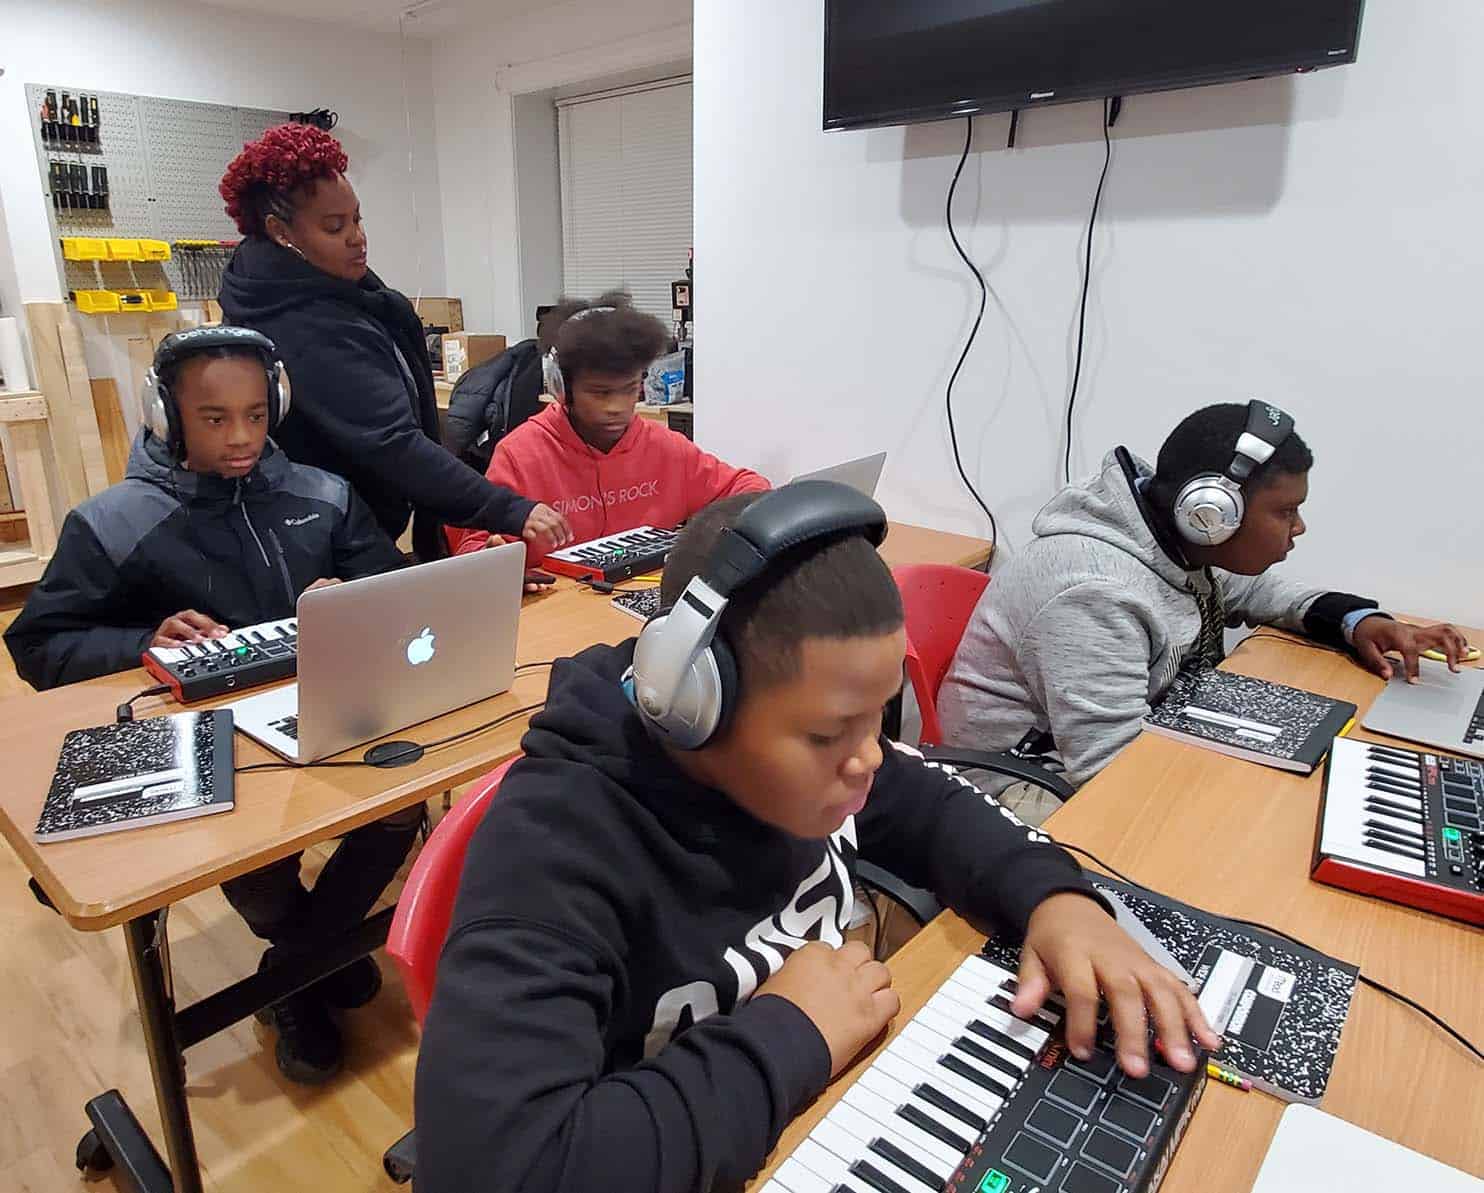 B.P.M. founder working with an all boys cohort as they are sharpening their music production skills